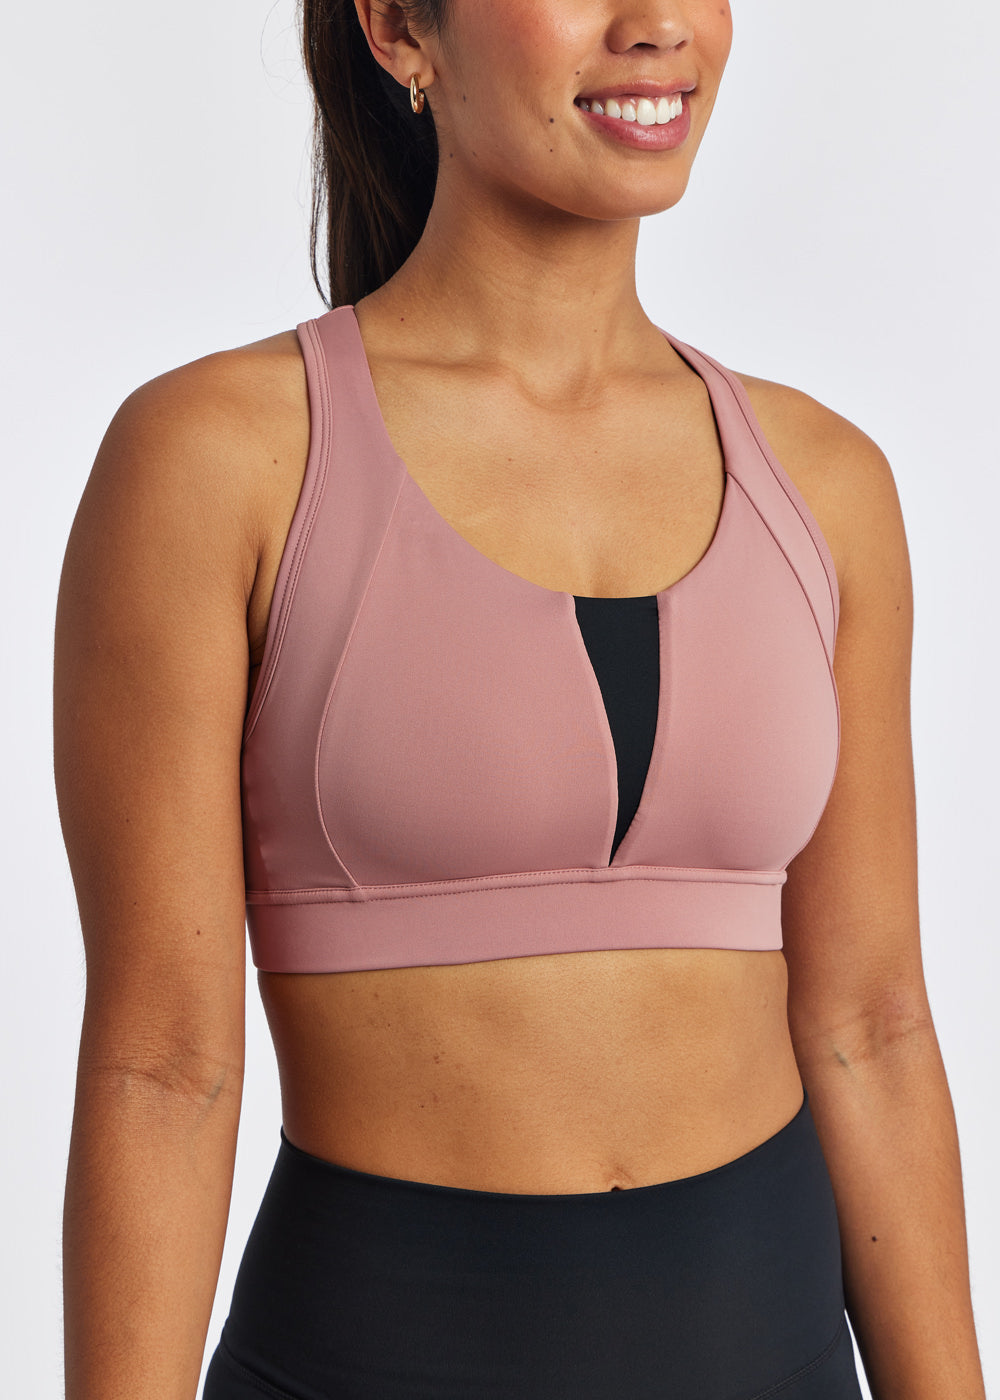 Black Samantha Sports Top / Sports Bras for Women / Women's Athletic Bra  Collection